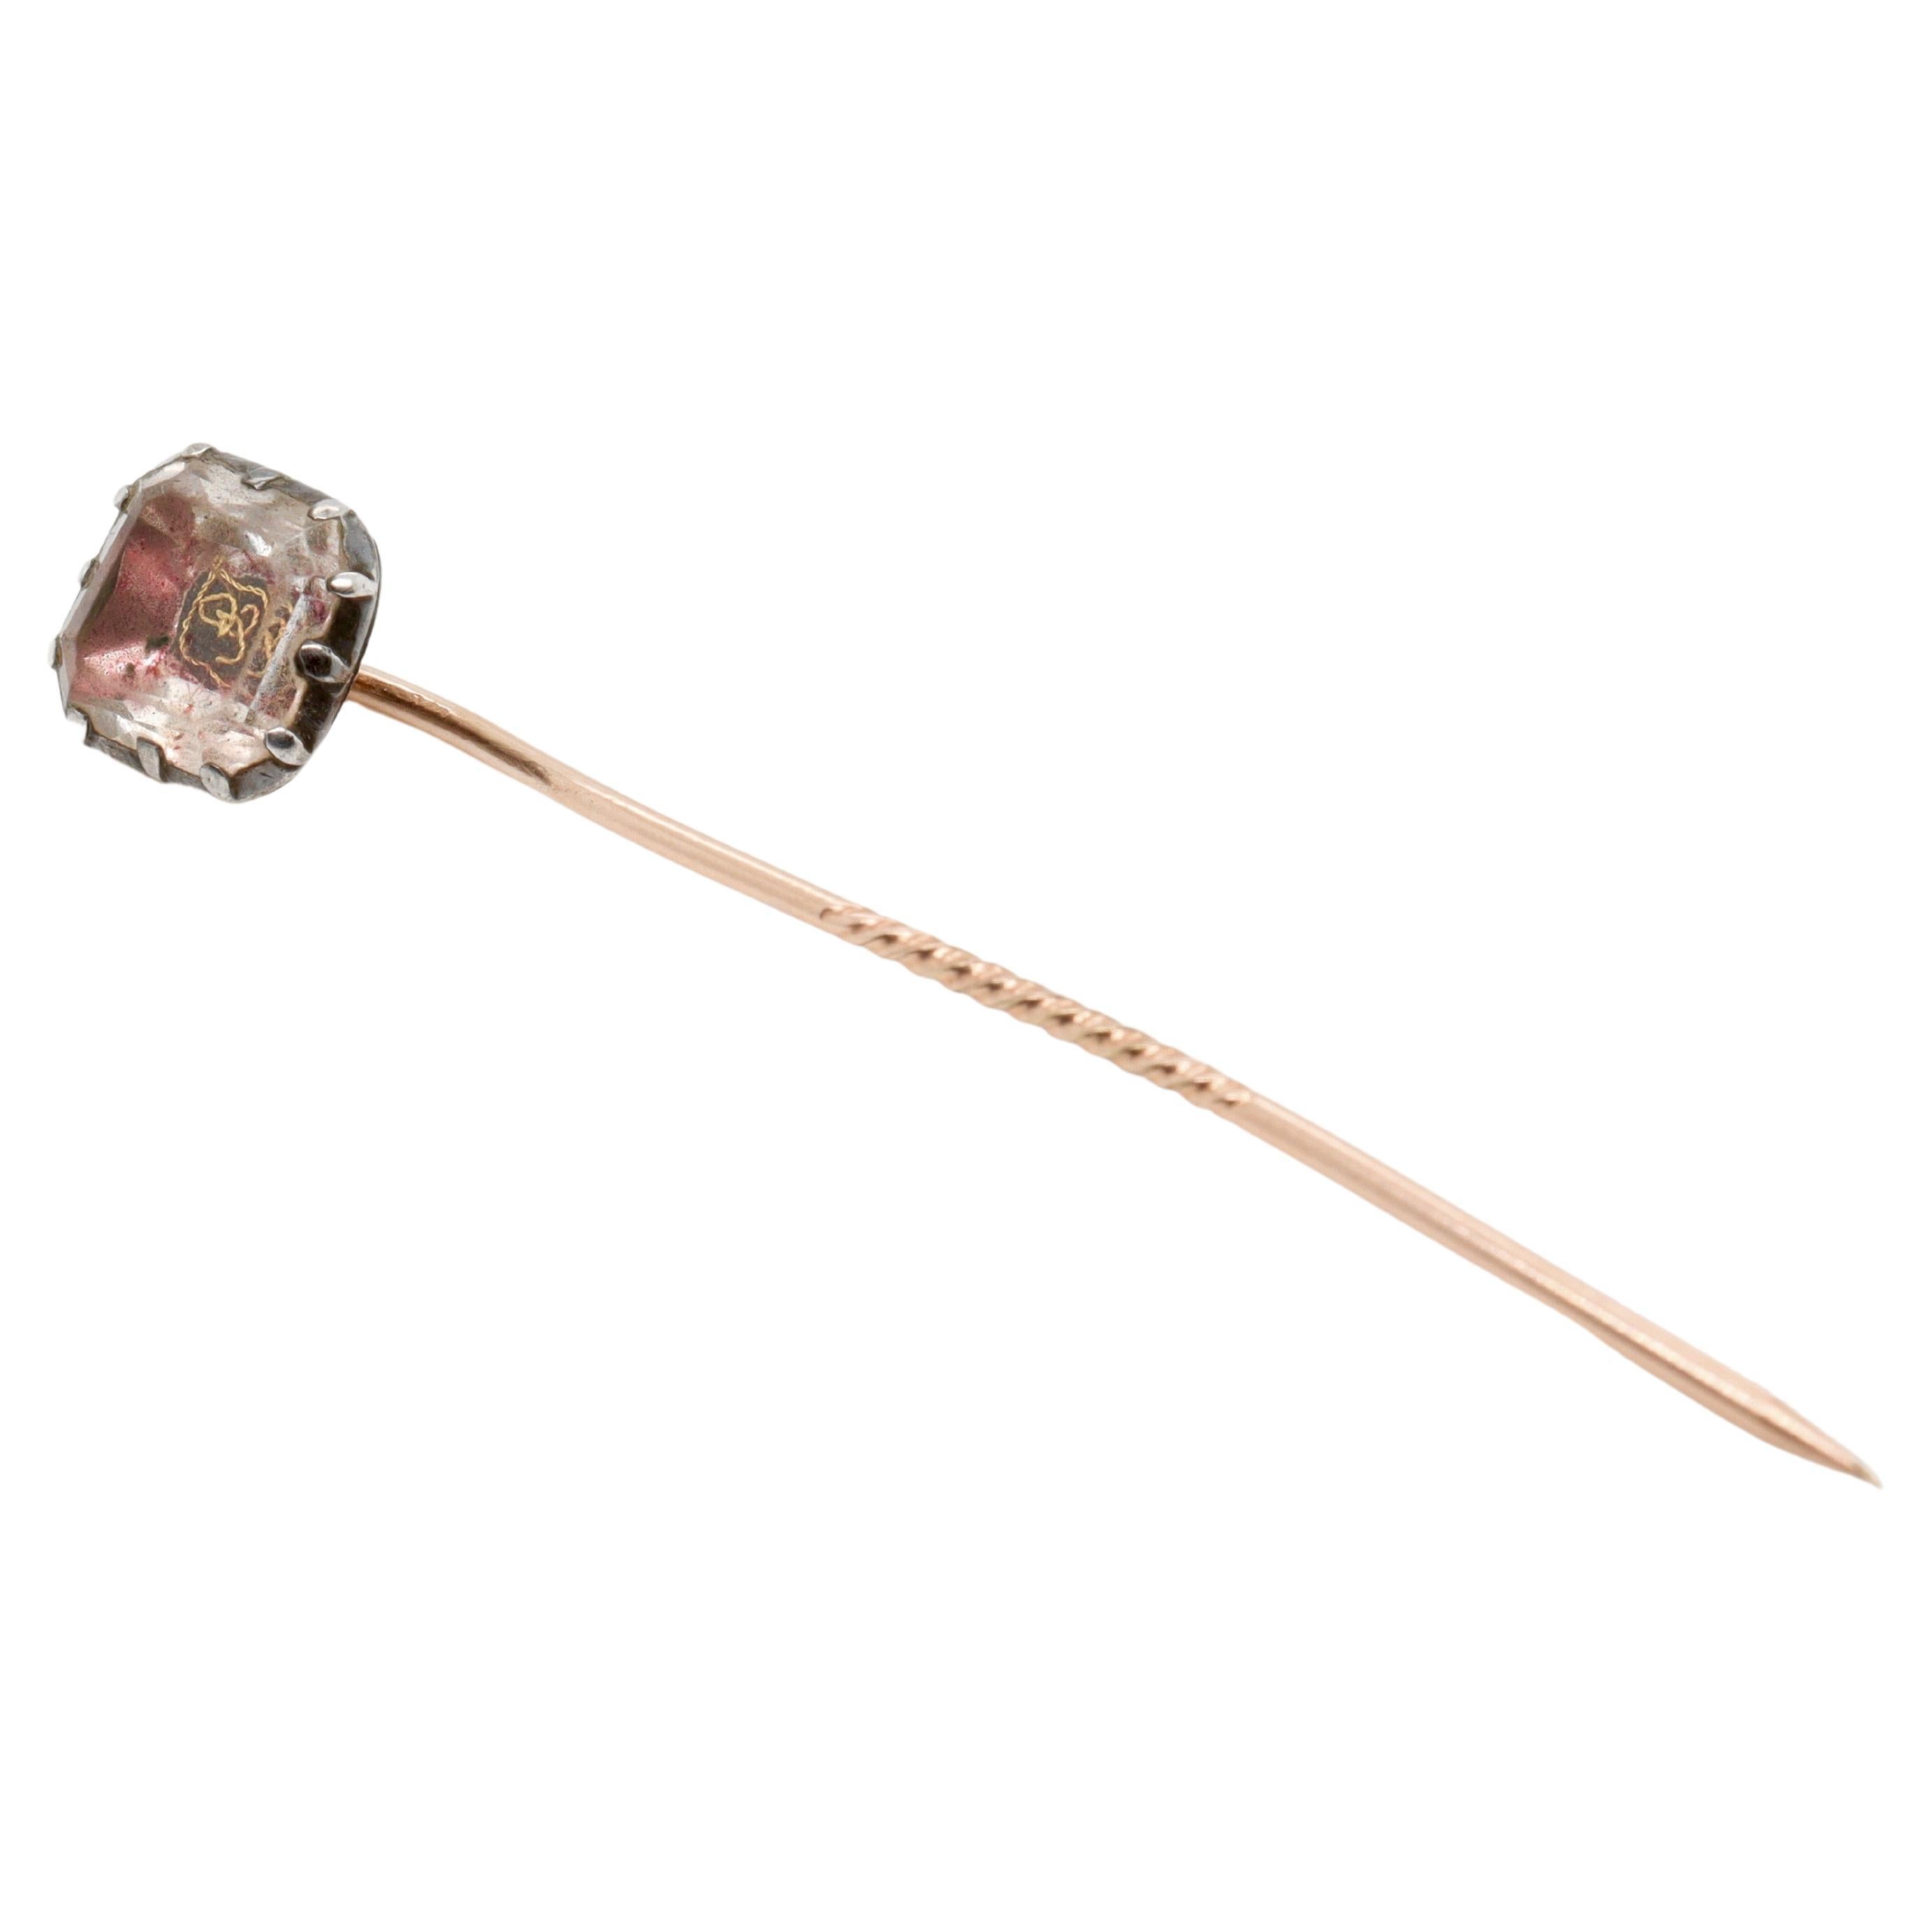 A fine antique Stuart Crystal stick pin.

Set with a faceted rock crystal, traces of pink and red foil, and a gold wire cypher.

The pin is likely adapted from an early 17th or 18th Century button. Stuart Crystals memorialized the slain King Charles